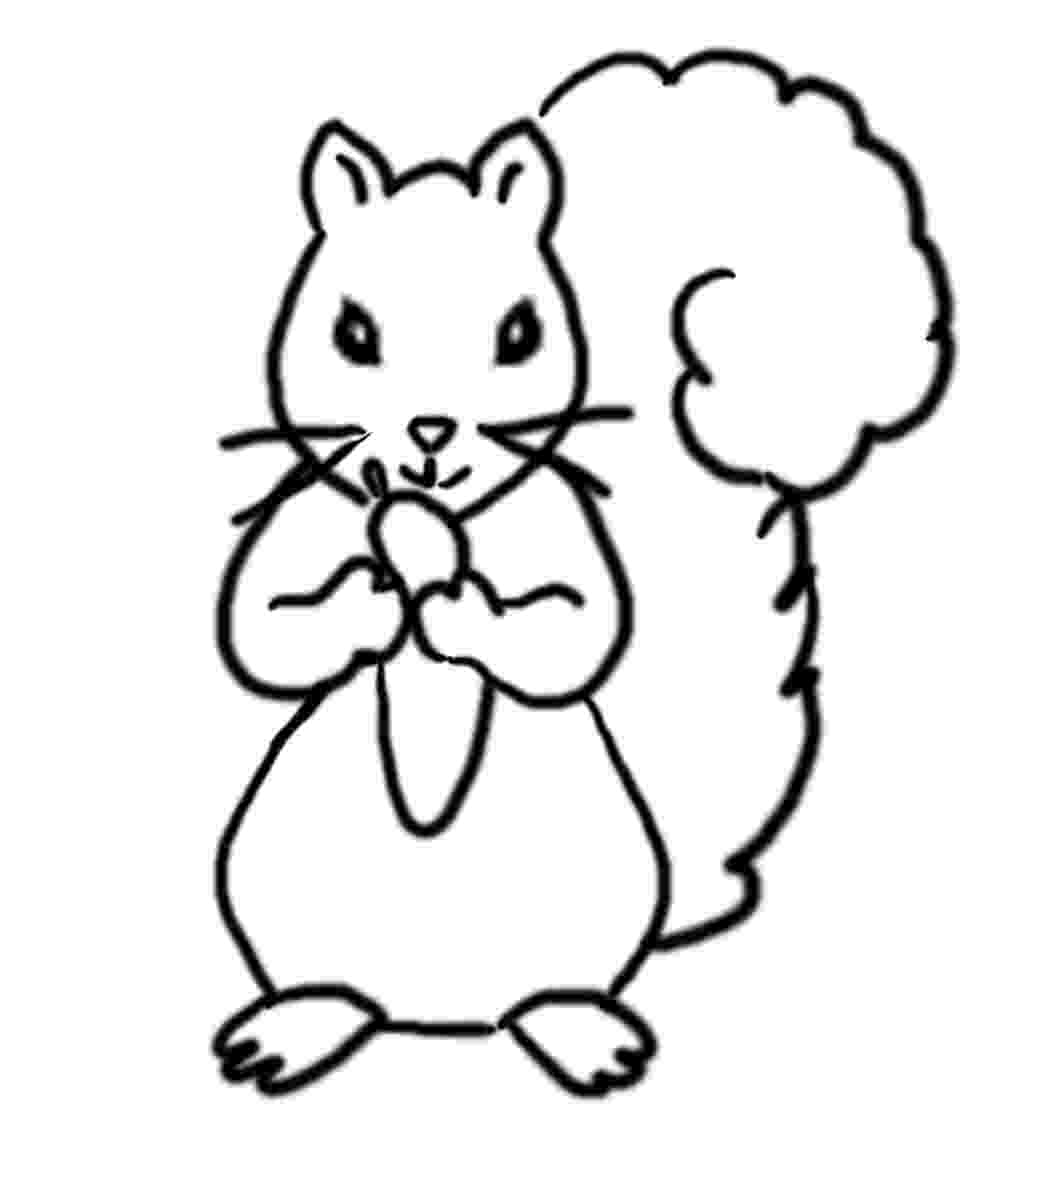 squirrel coloring pages free free squirrel coloring pages free coloring pages squirrel 